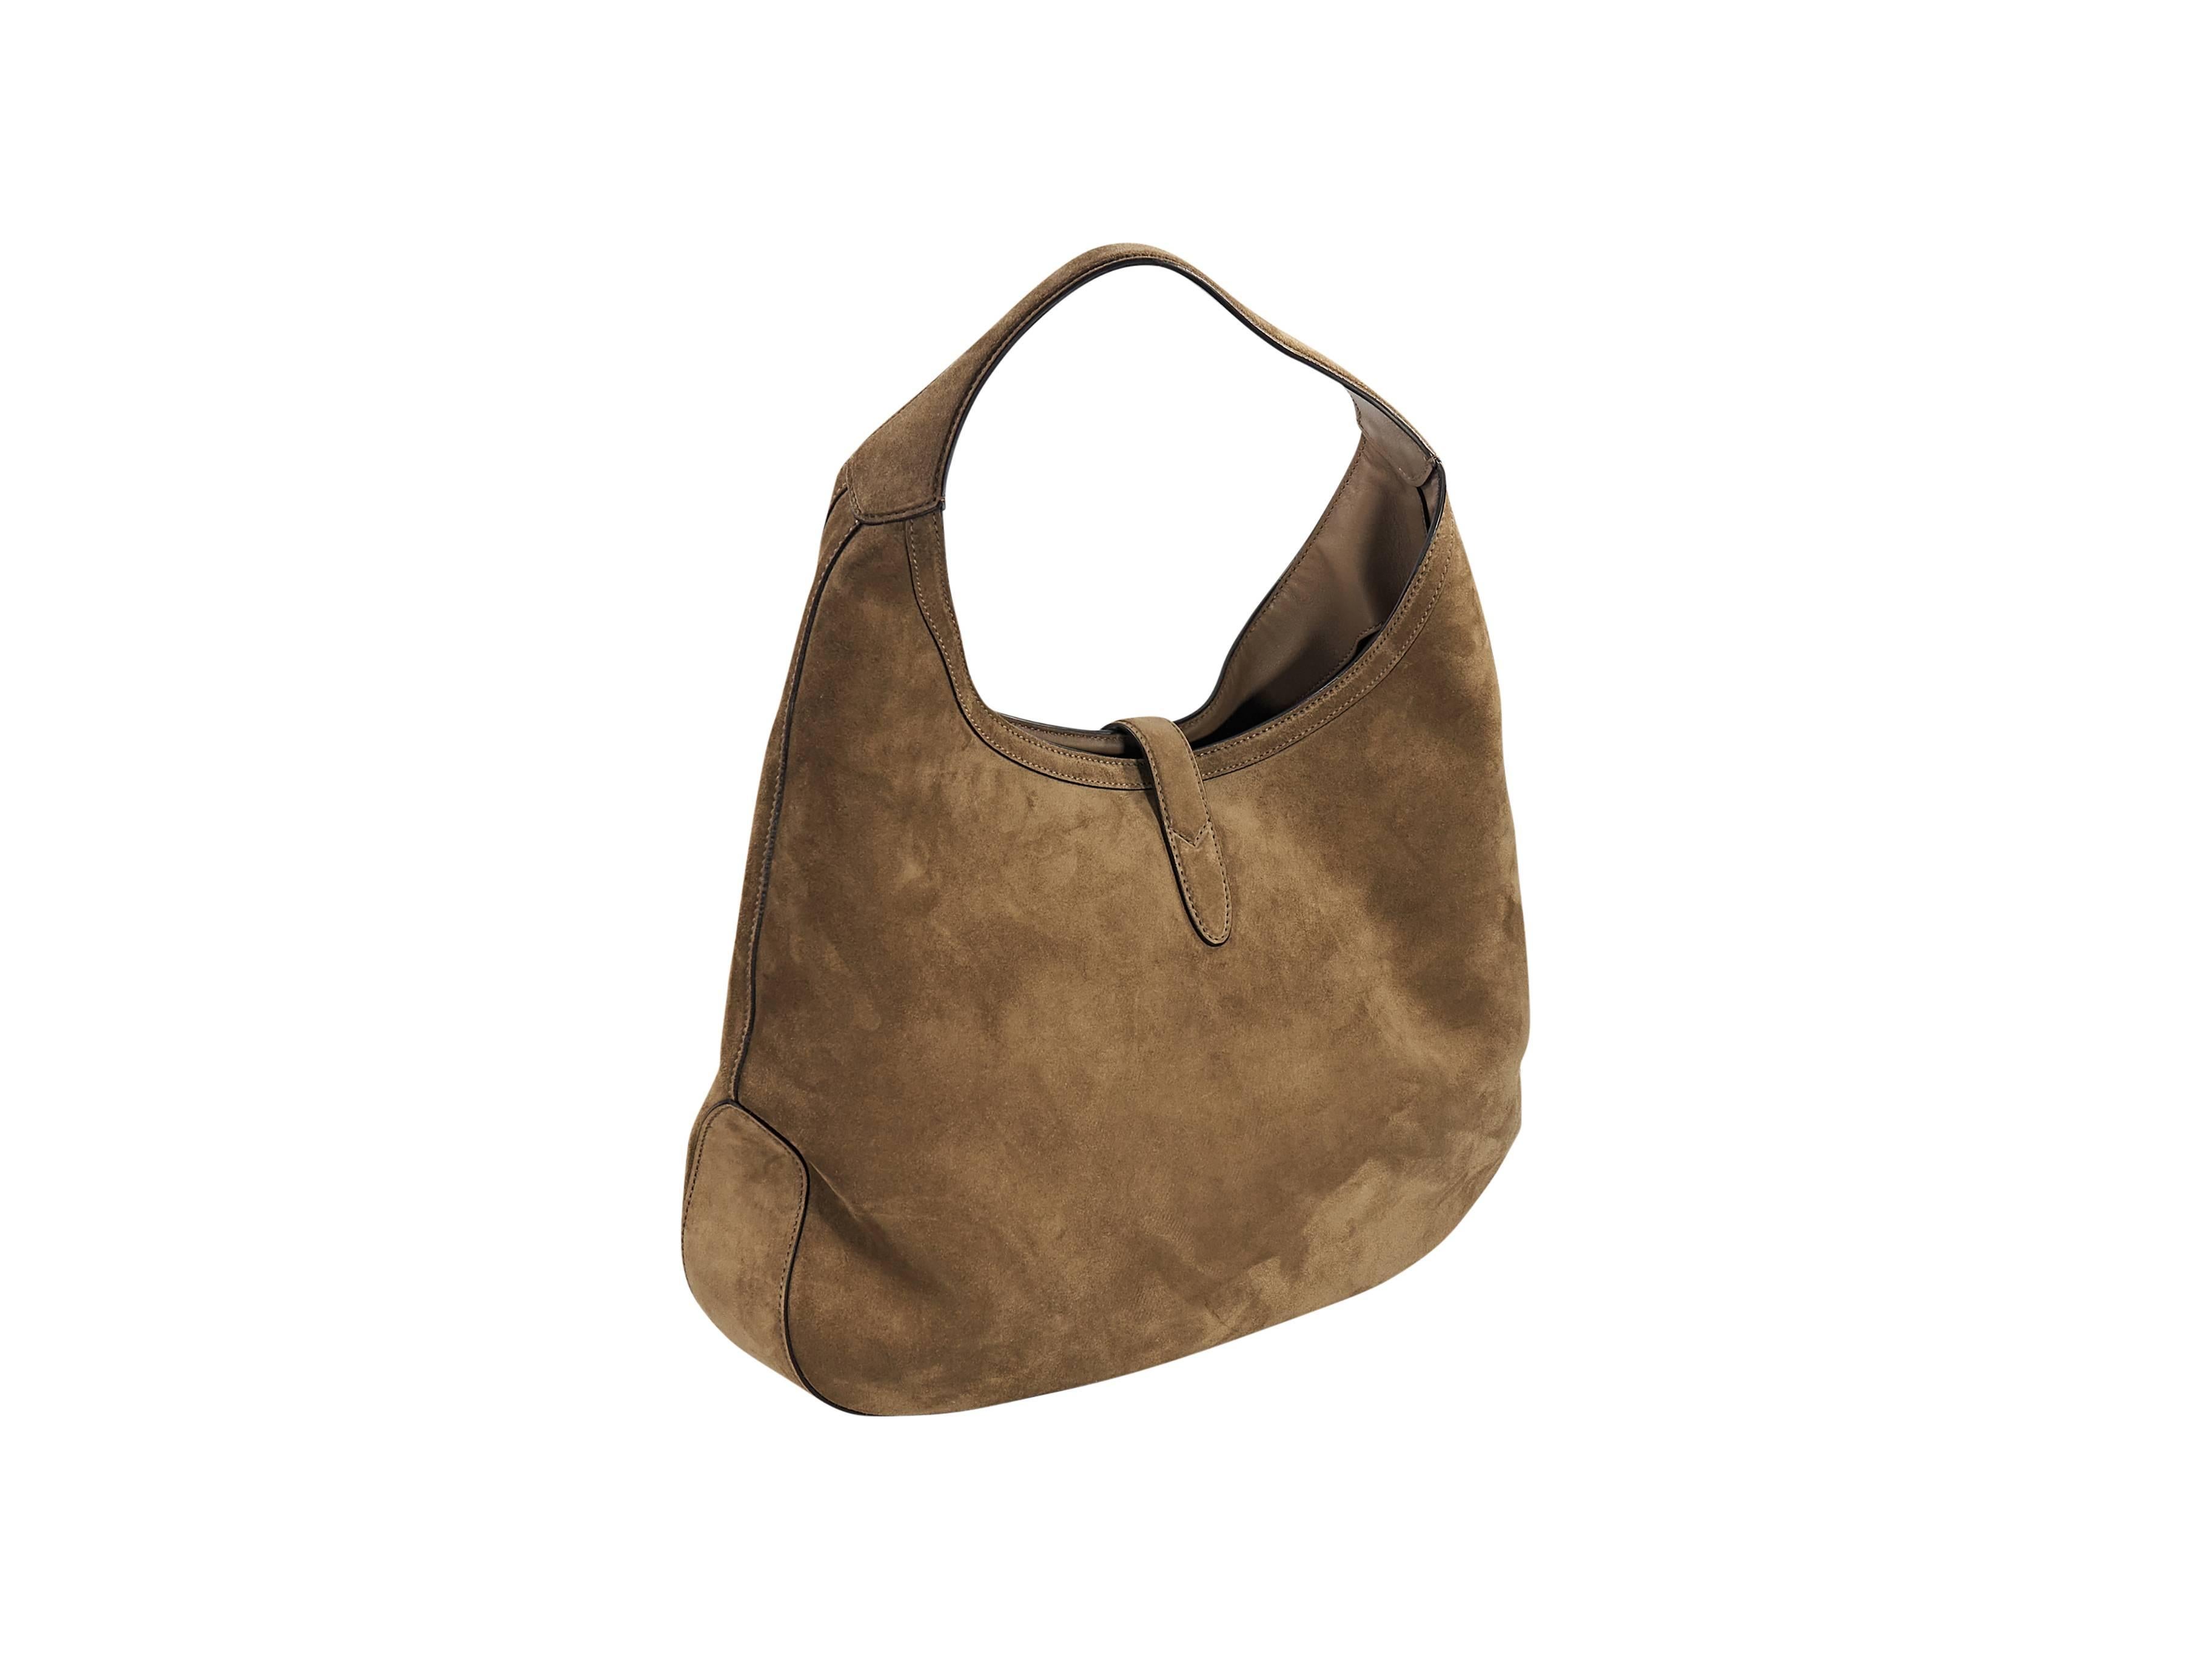 Product details:  Tan suede hobo bag by Gucci.  Features front signature logo stripes.  Single shoulder strap.  Top strap with clasp closure.  Lined interior with detachable pouch.  Goldtone hardware.  16.5